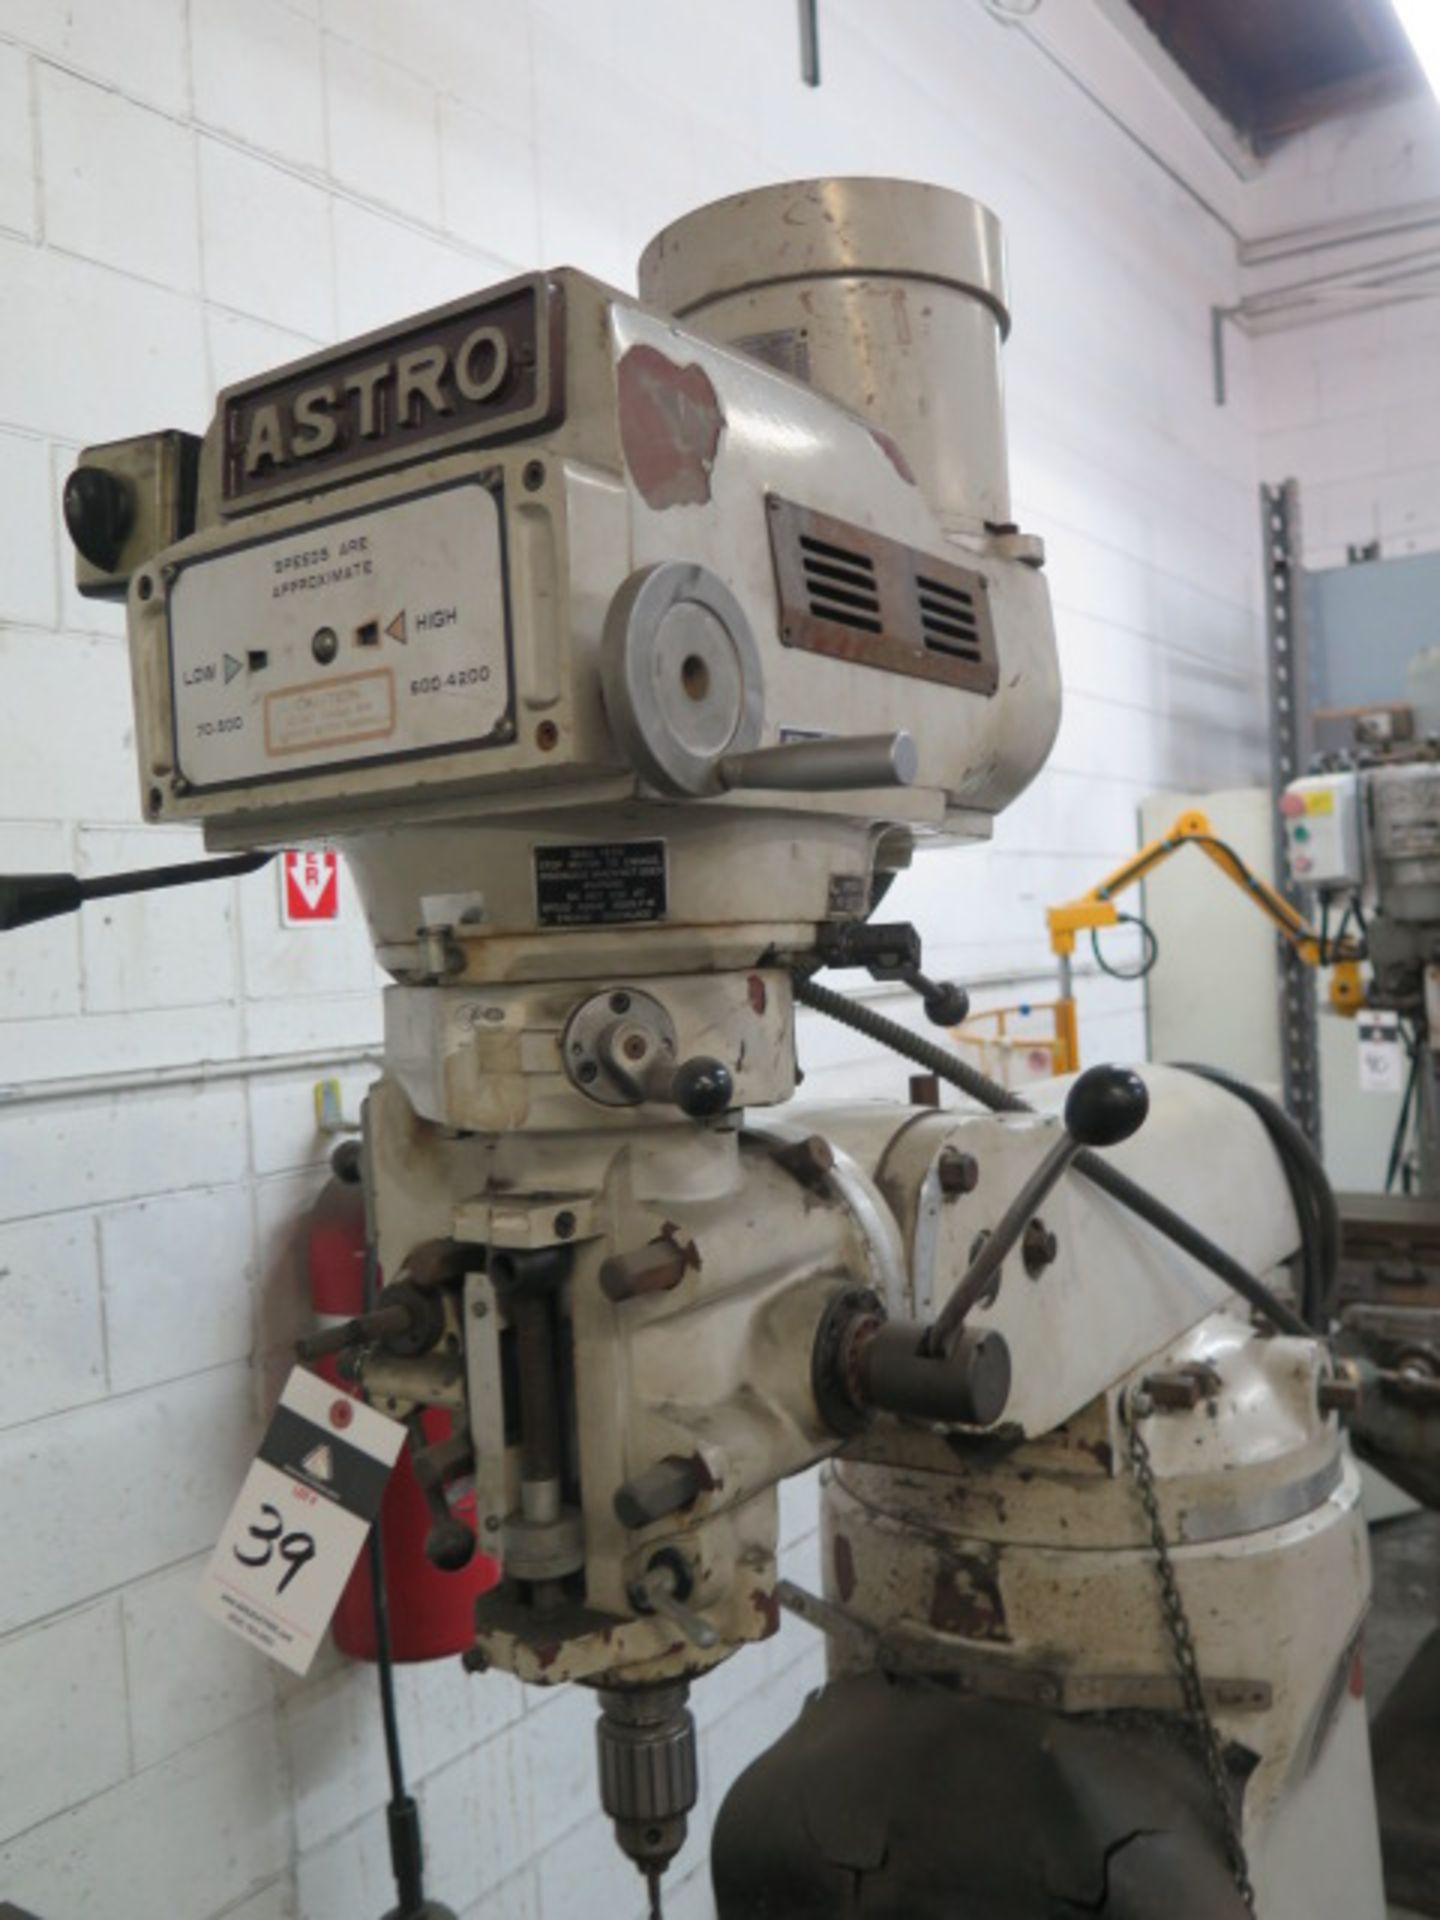 Astro GS-15V Vertical Mill s/n 861011 w/ 2Hp Motor, 70-4200 Dial Change RPM, Chrome Ways, 9” x 49” - Image 2 of 7